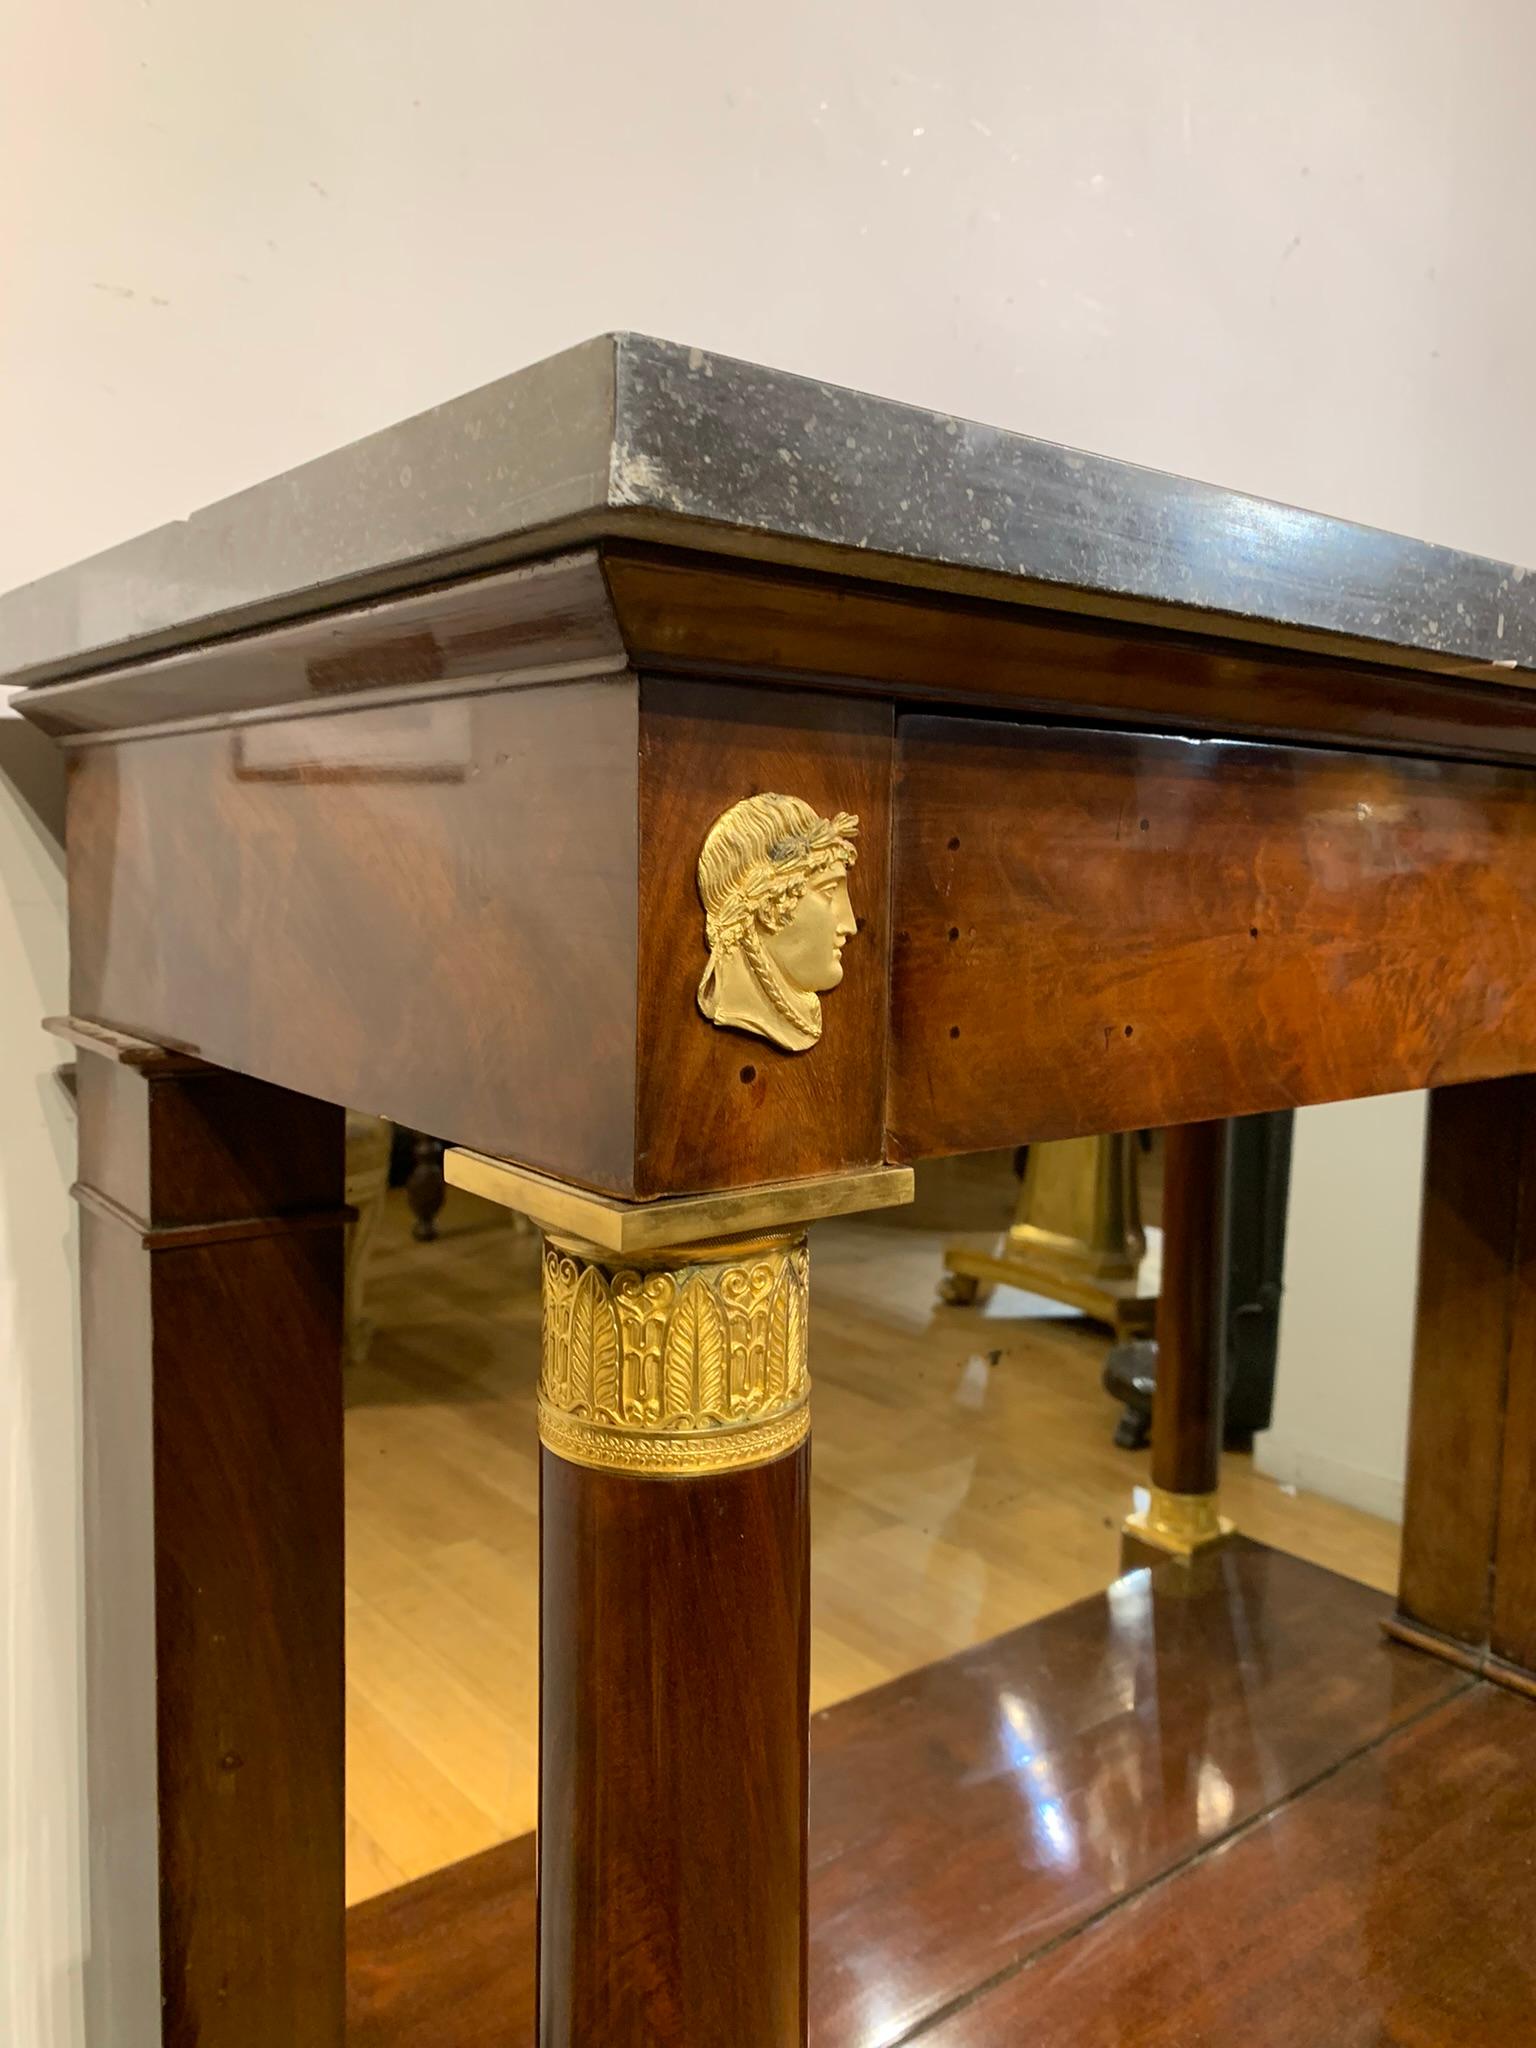 Early 19th Century Mahogany and Bronze Consolle, Louis-françois Bellangé Studio 1